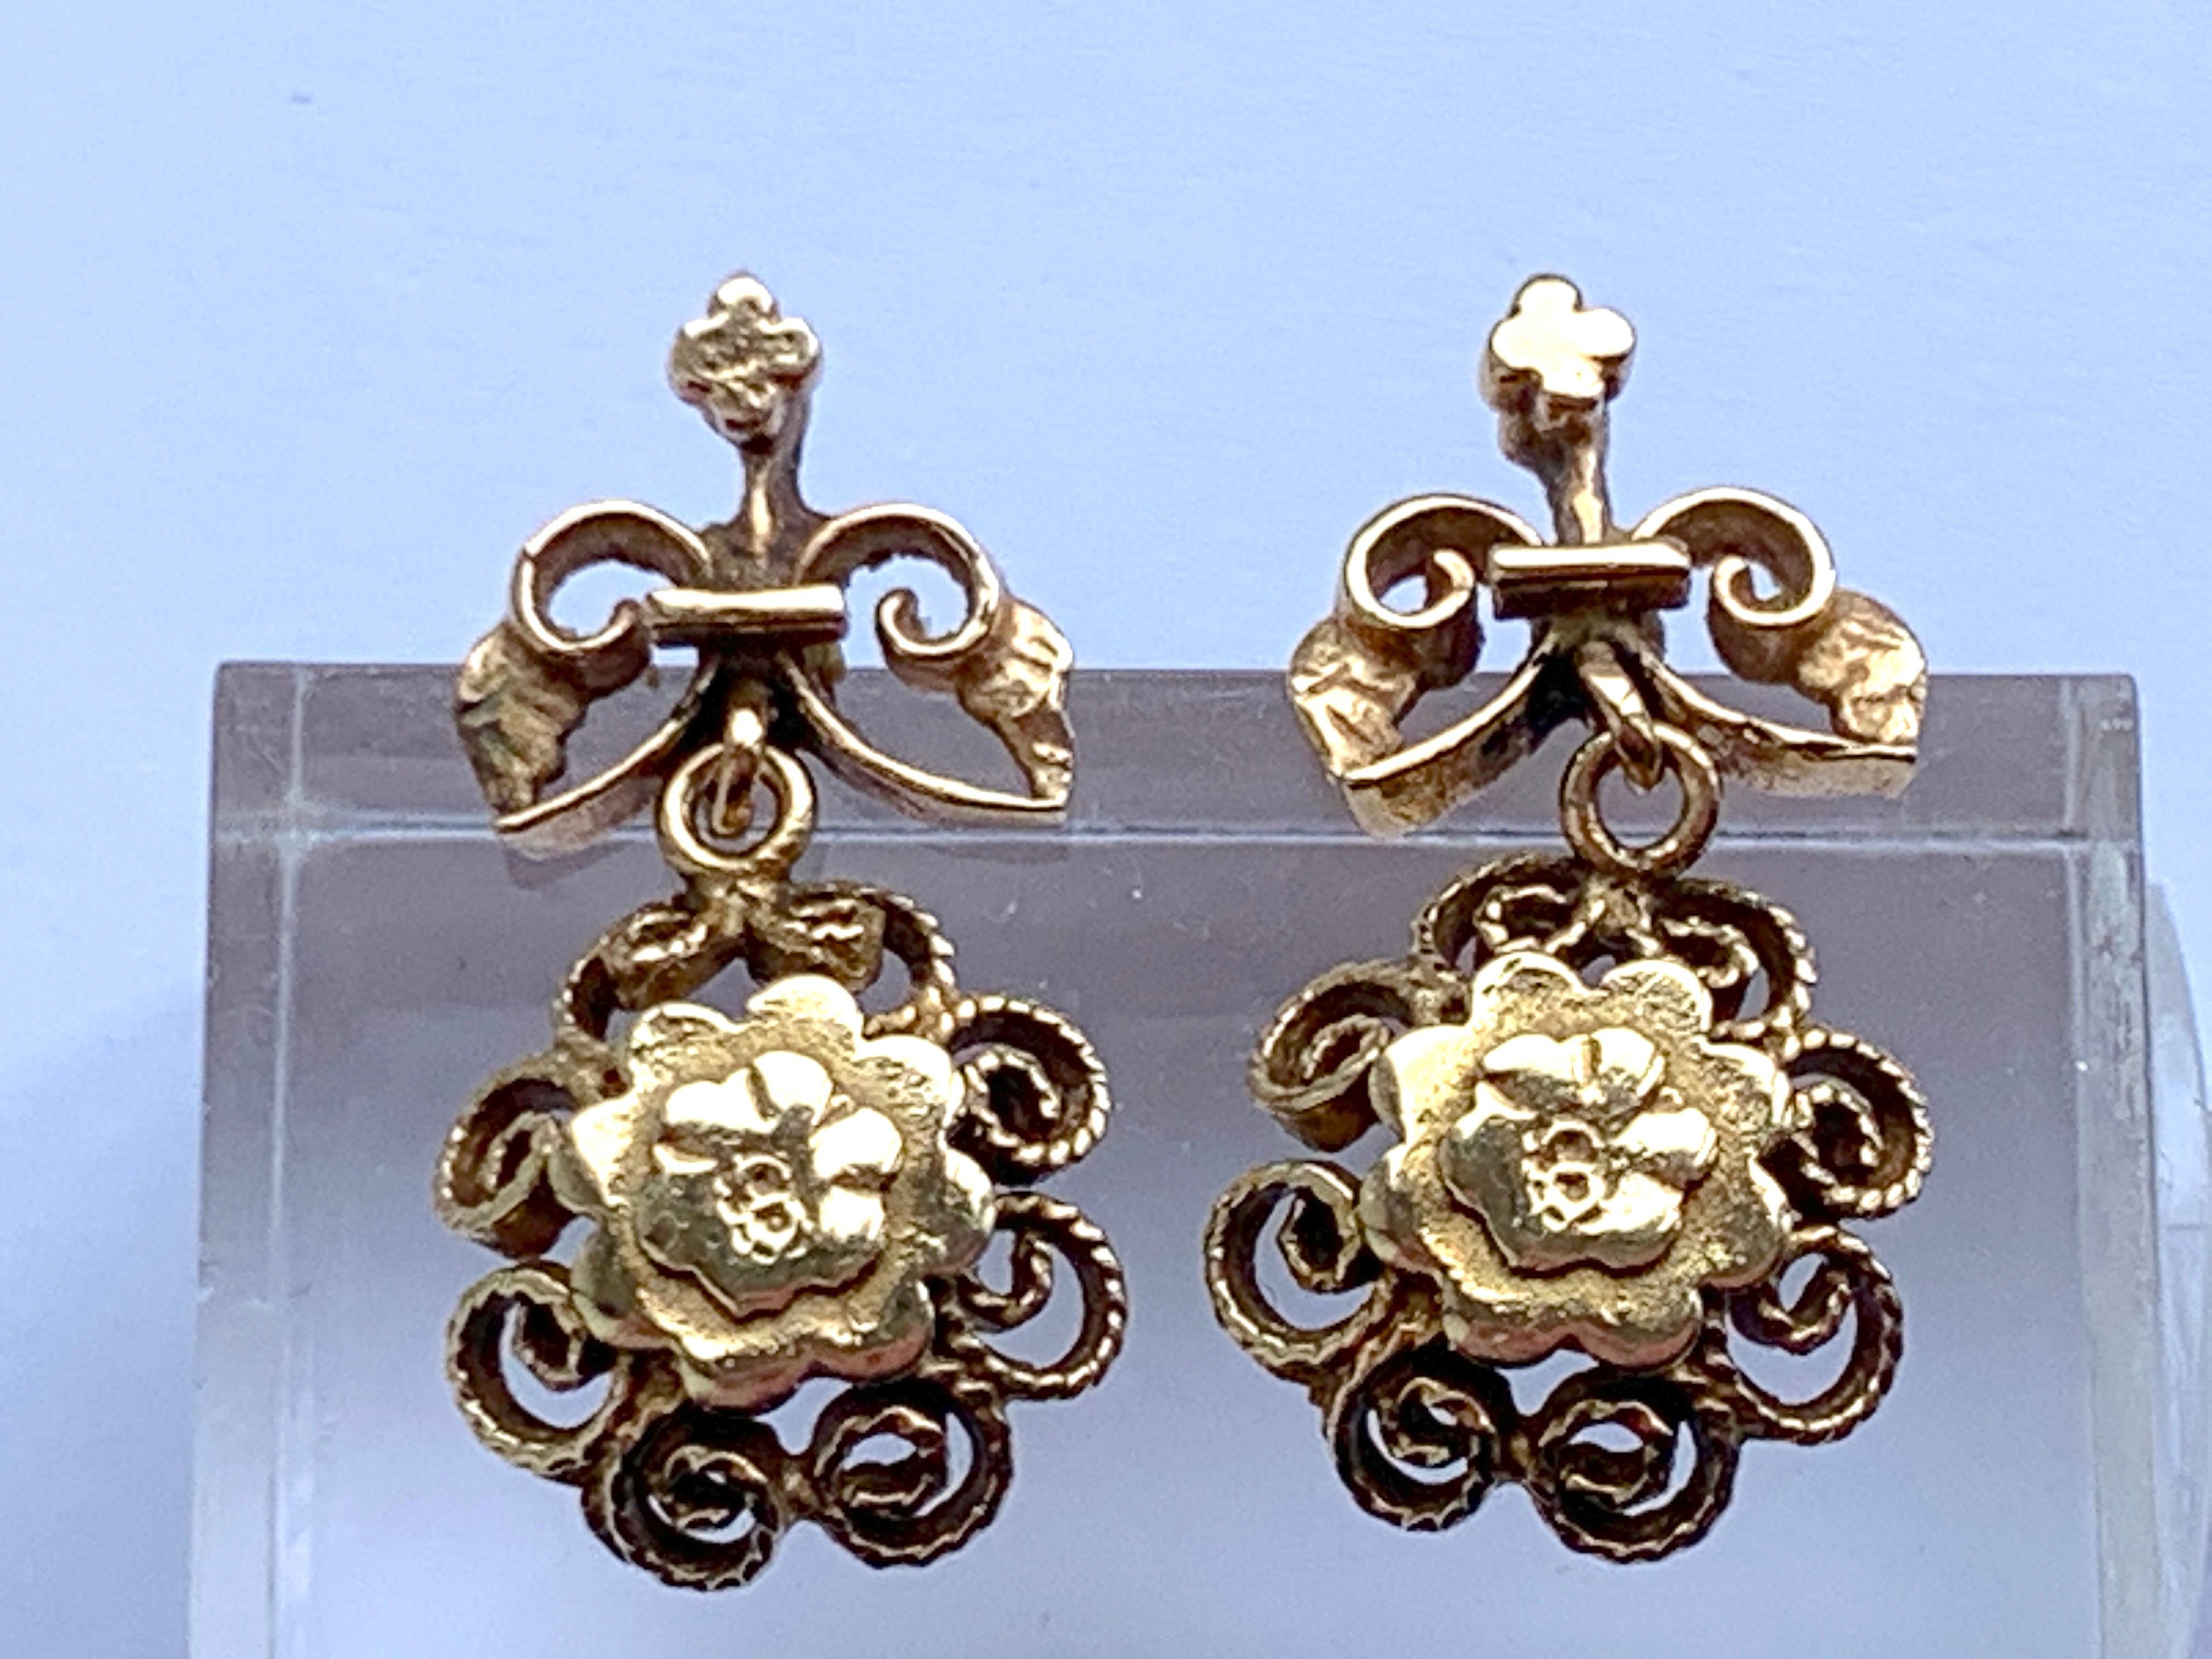 Antique 14ct Gold Victorian Floral earrings
Circa Late 1800's

Beautiful Floral and Bow design
that depicts the femininity of the Victorian era

Condition - Very Good - no butterfly backs present

Length - 2.5 cm (Centimeters)

Diameter of base